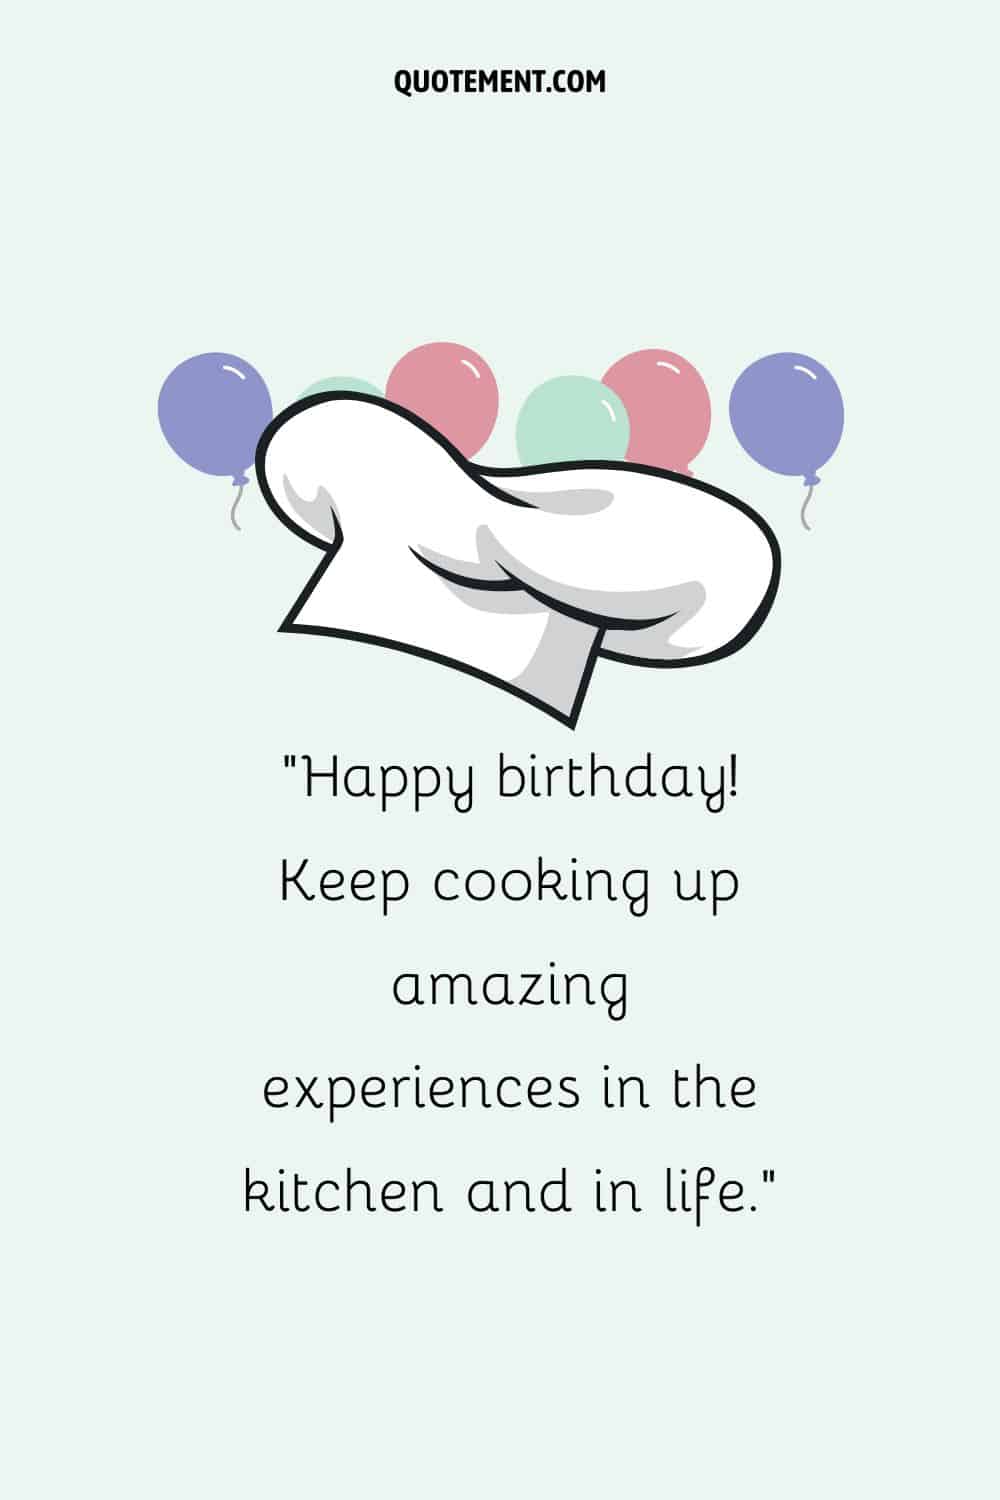 Illustration of a chef's hat with balloons representing a cute birthday wish.
